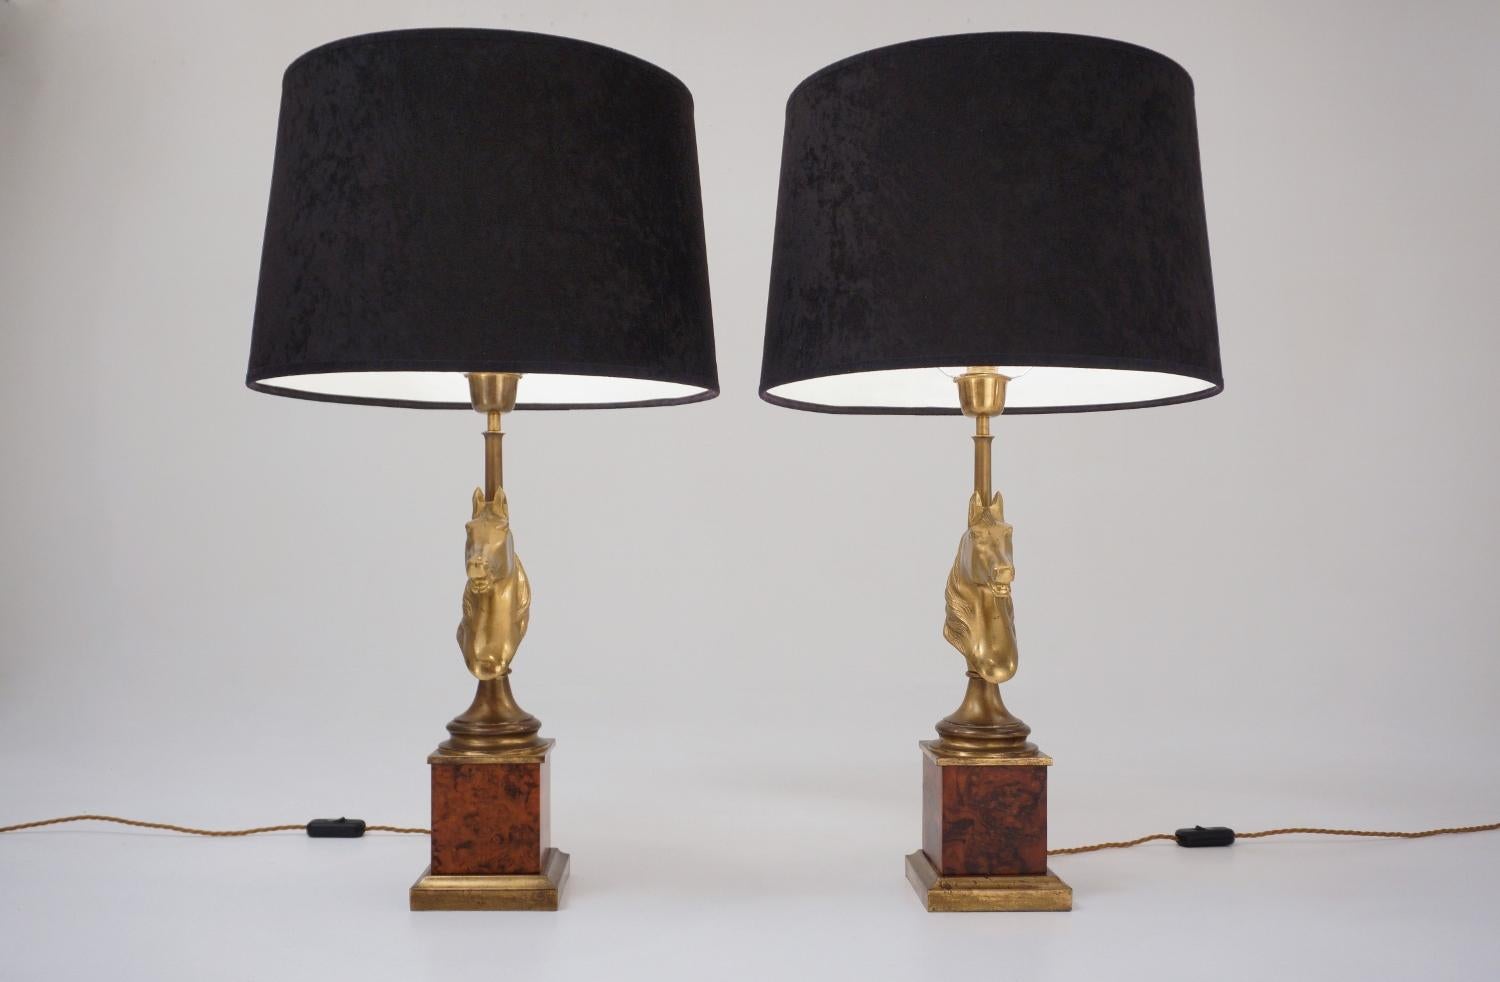 Maison Charles Horse Lamps Pair of Brass & Burl Walnut, circa 1970s, French 4